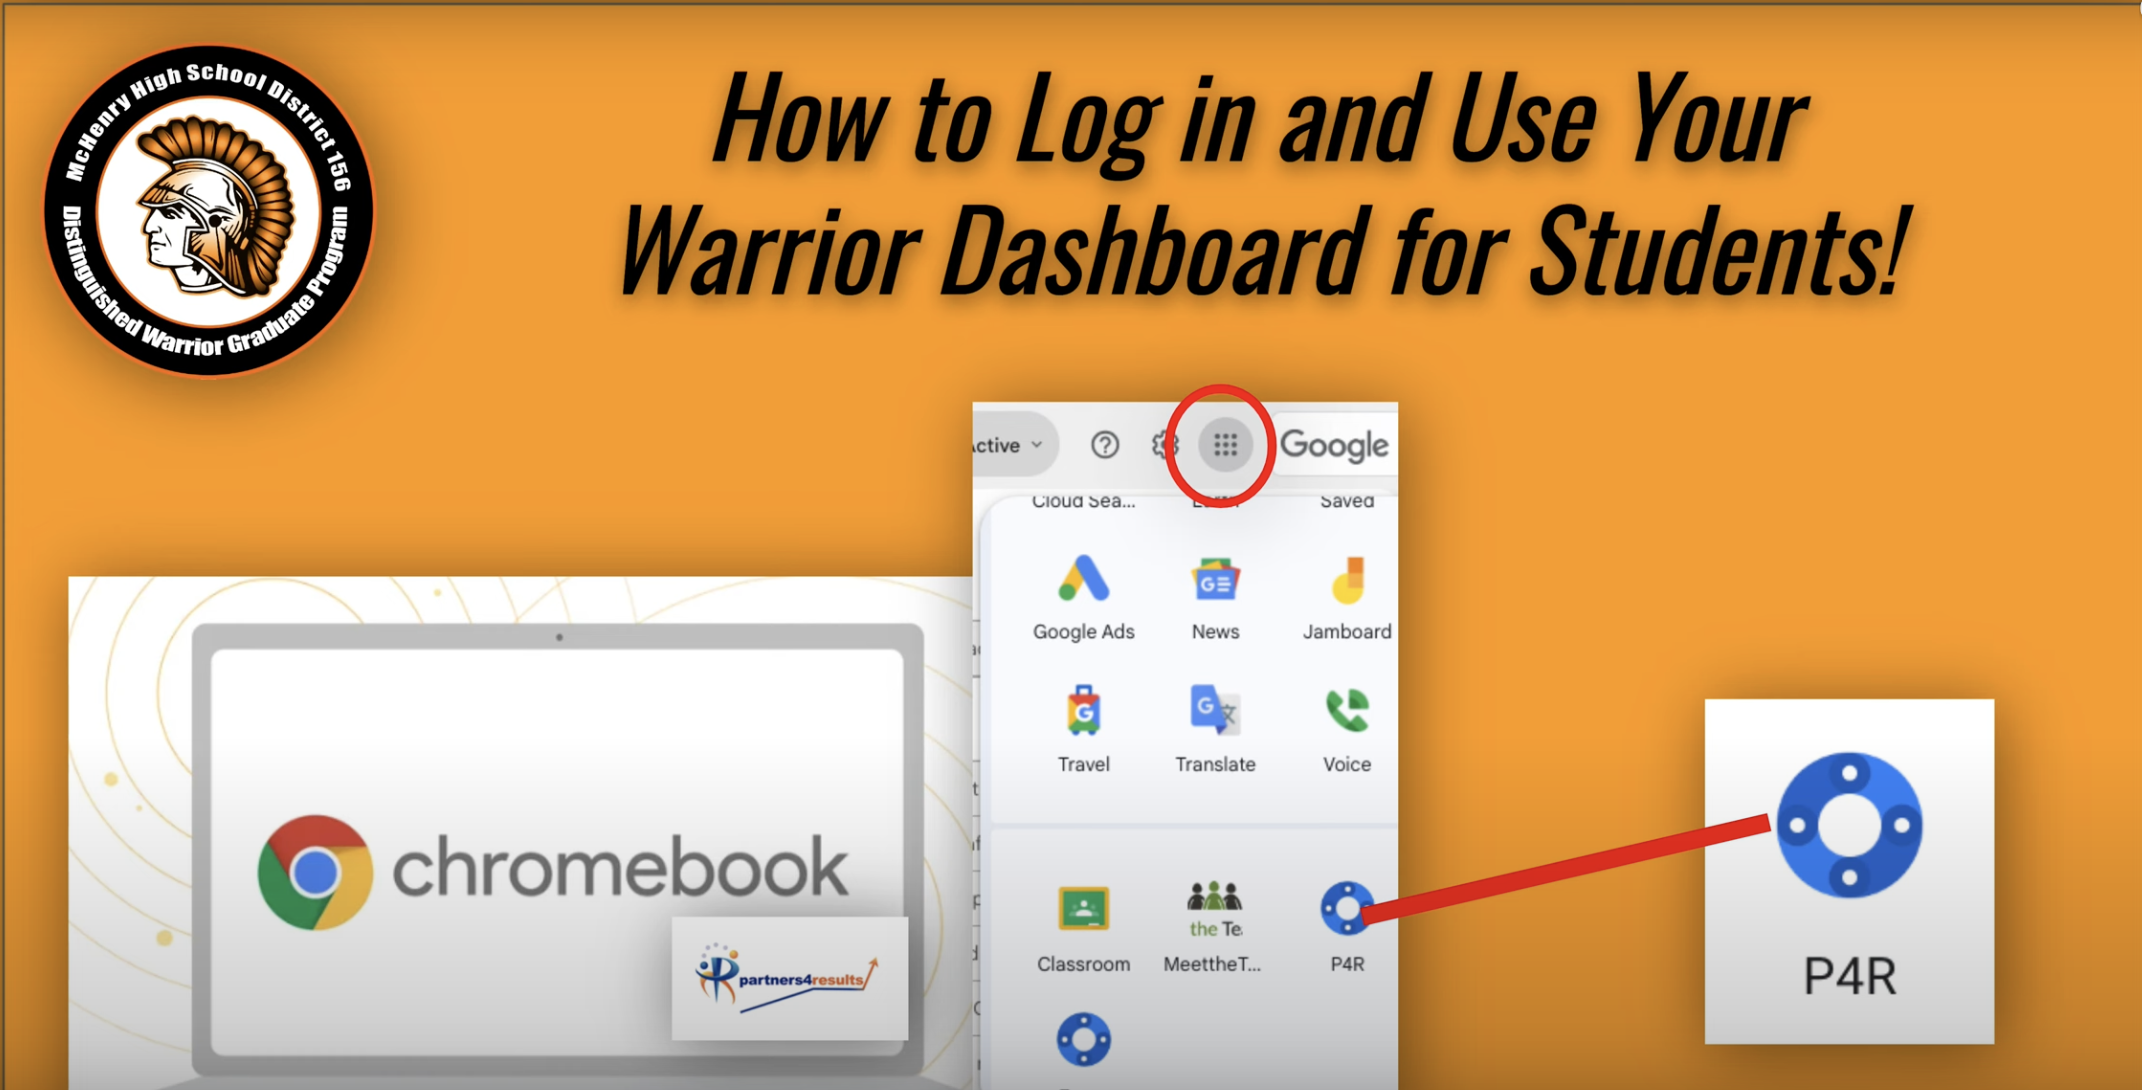 How to Log in and use your Warrior Dashboard for students! An image of a Chromebook and selecting the waffle tile on Google Chrome for P4R